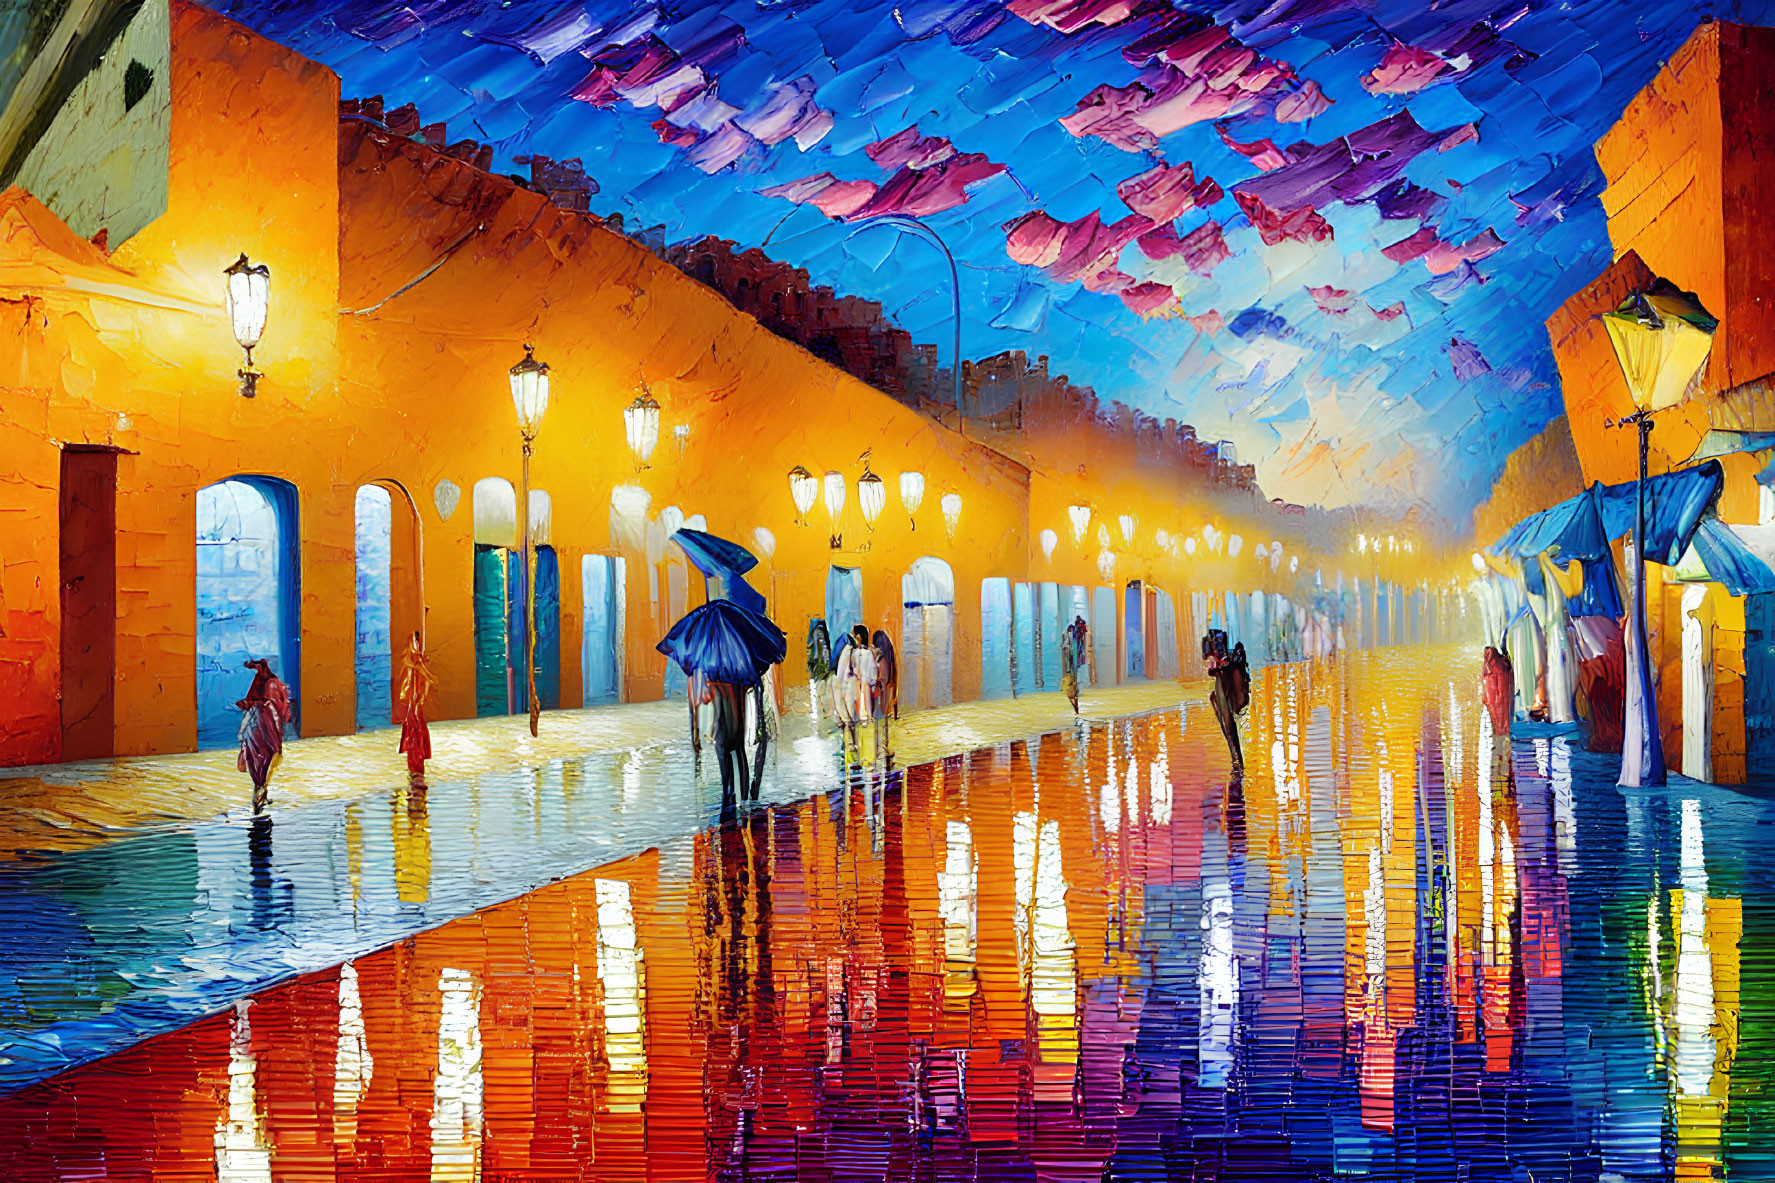 Colorful Impressionistic Painting of People Walking in Rainy Street